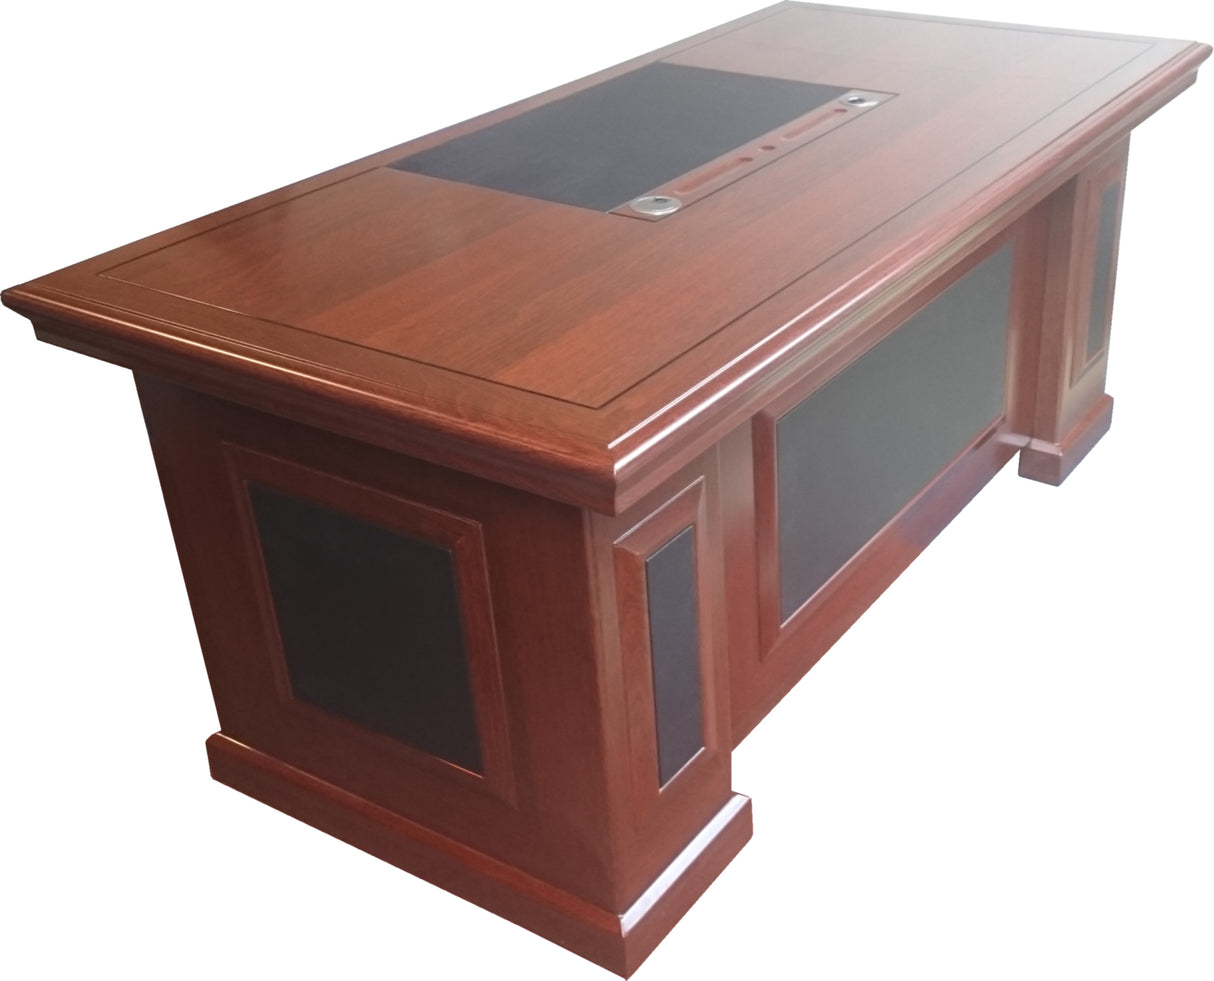 Mahogany Executive Desk With Leather Detailing - With Pedestal and Return - 1819